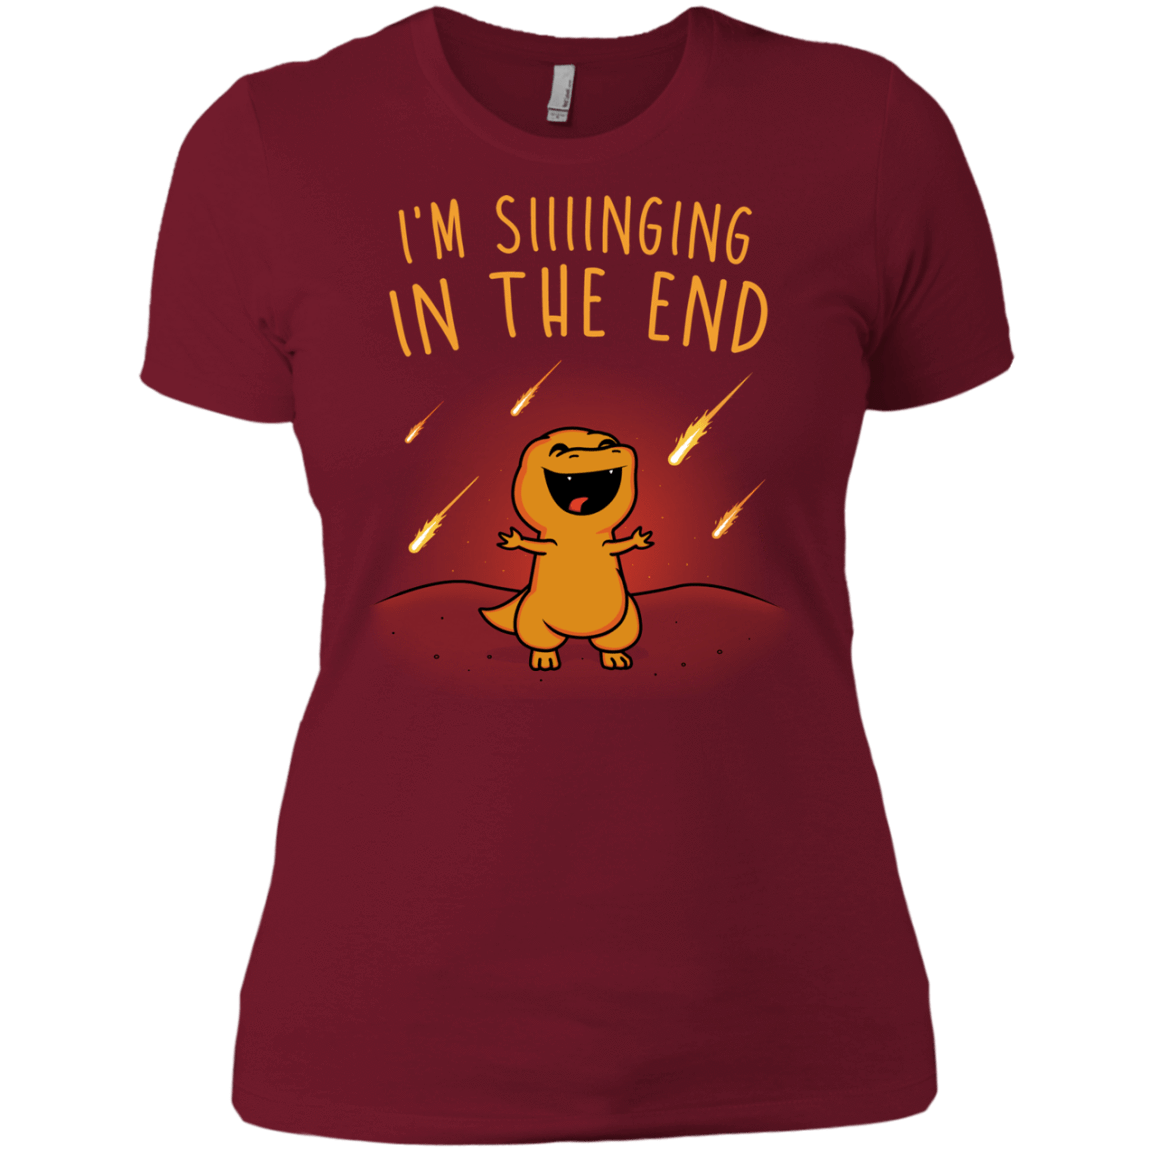 T-Shirts Scarlet / X-Small Singing in the End Women's Premium T-Shirt